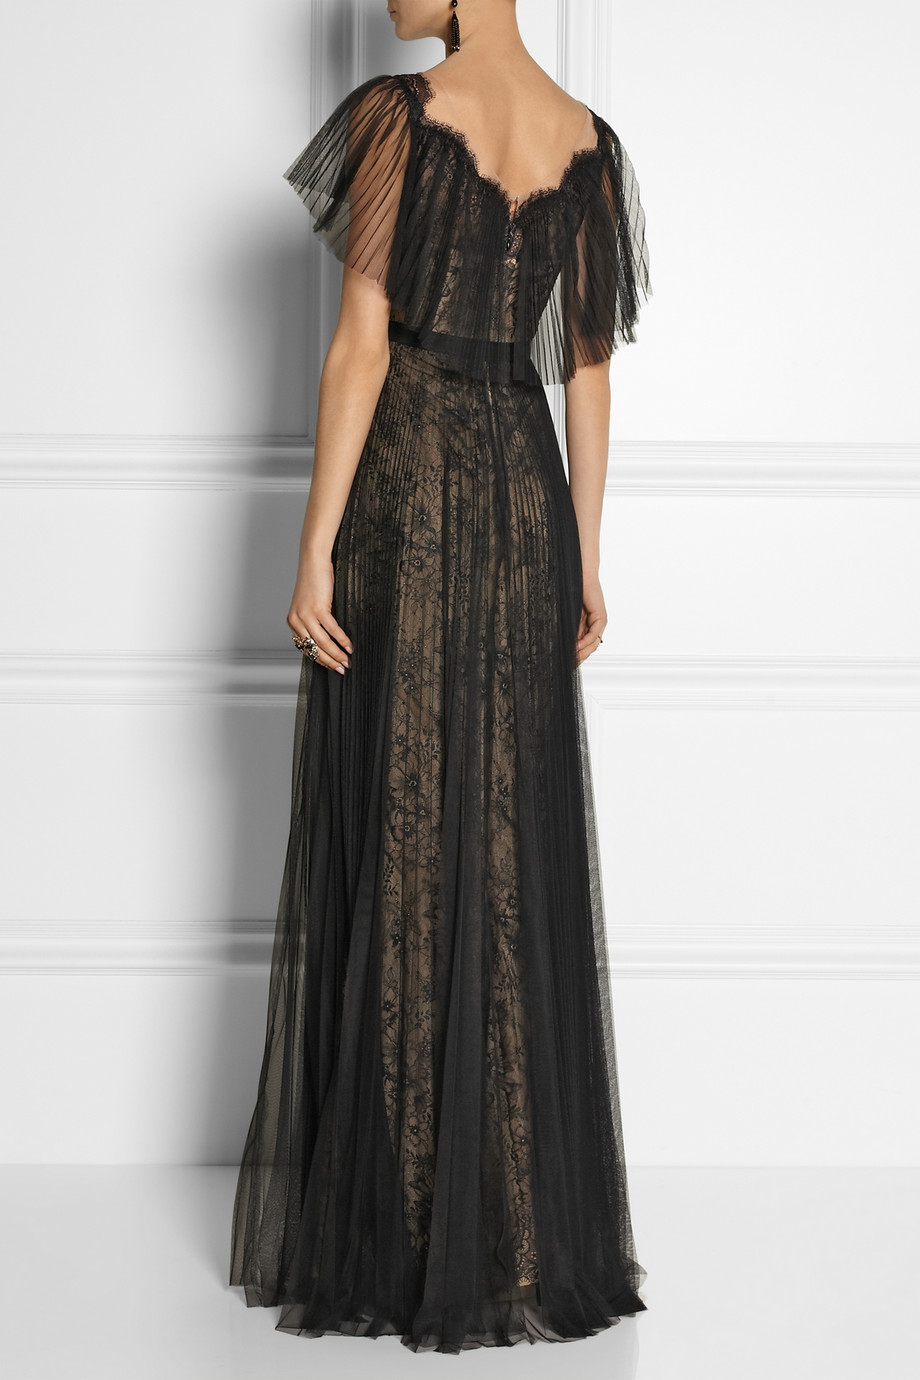 Lyst - Notte By Marchesa Lace and Pleated Tulle Gown in Black